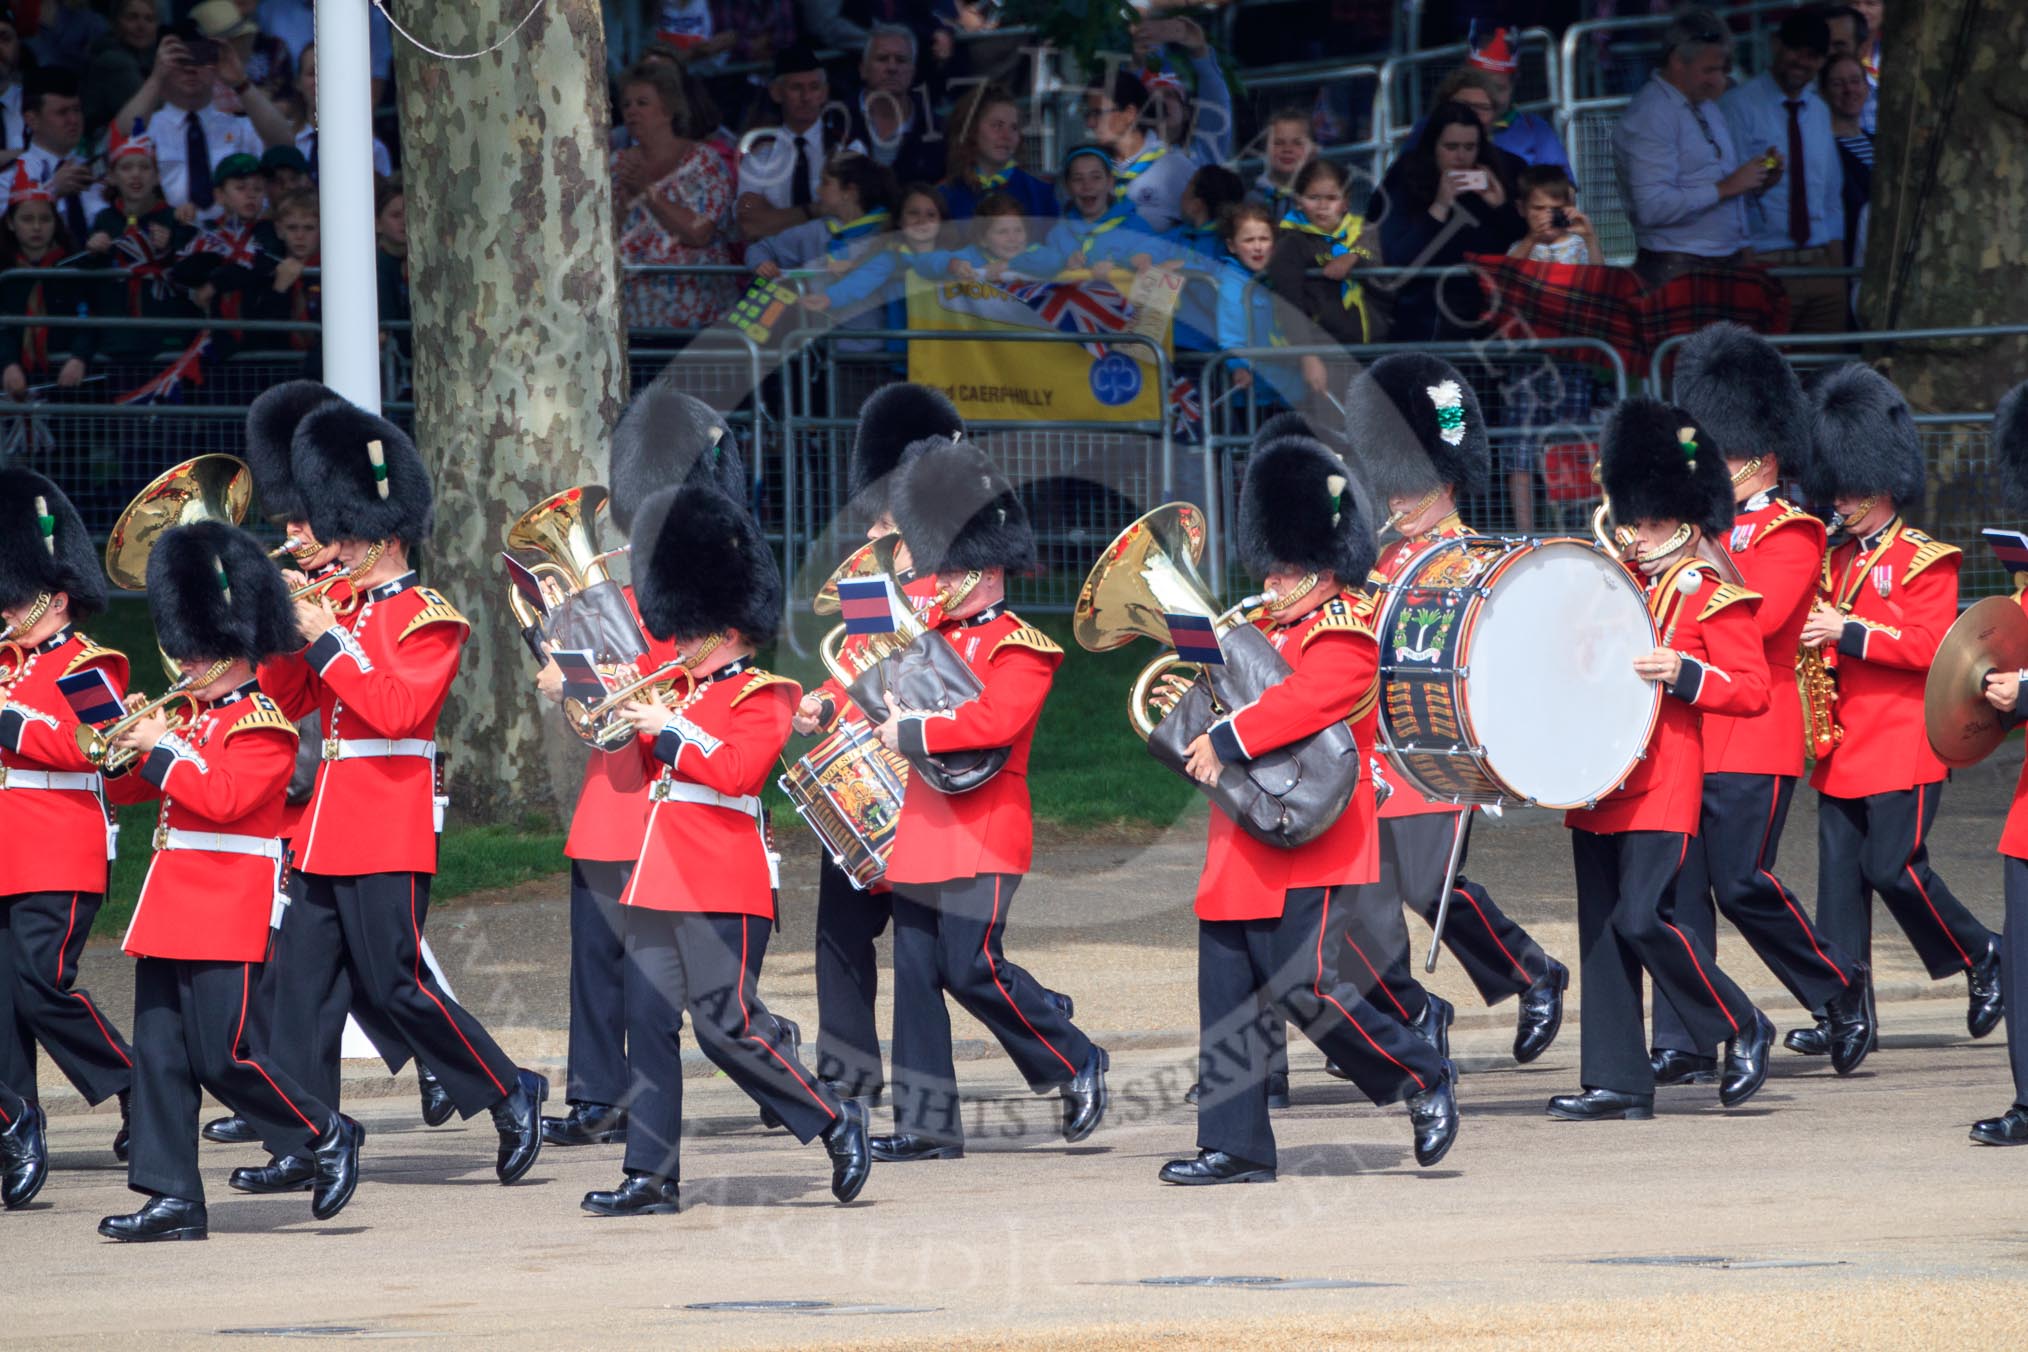 The Band of the Welsh Guards marching past the Youth Enclosure during Trooping the Colour 2018, The Queen's Birthday Parade at Horse Guards Parade, Westminster, London, 9 June 2018, 10:12.